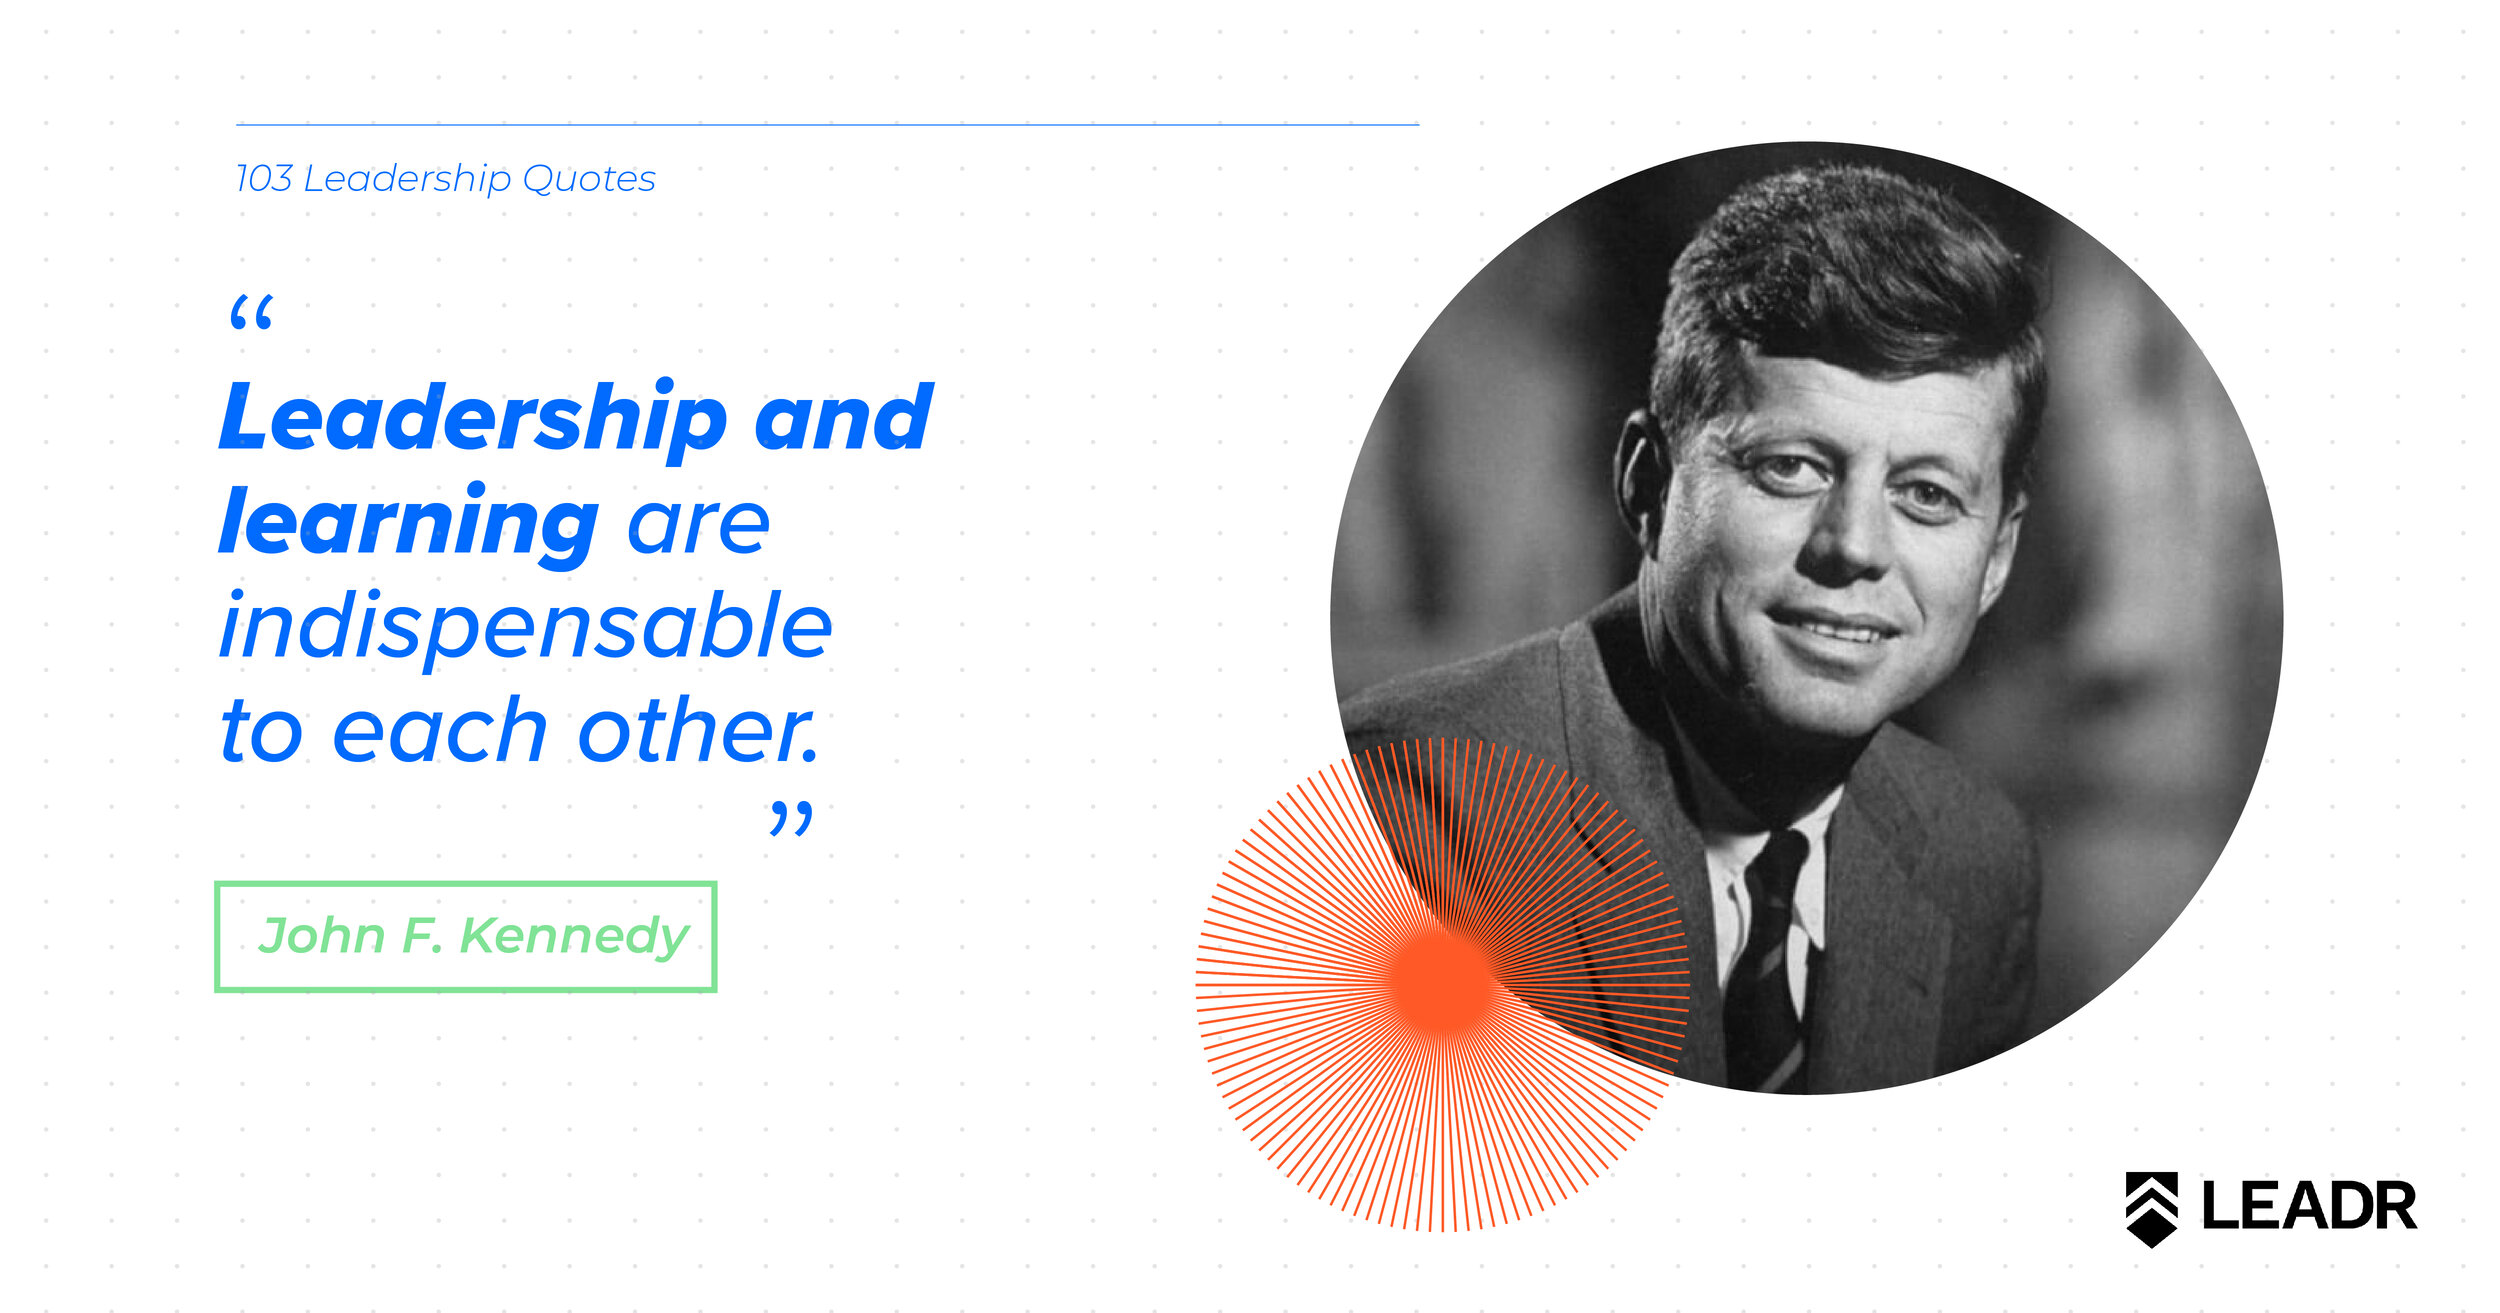 Royalty free downloadable leadership quotes - John F. Kennedy